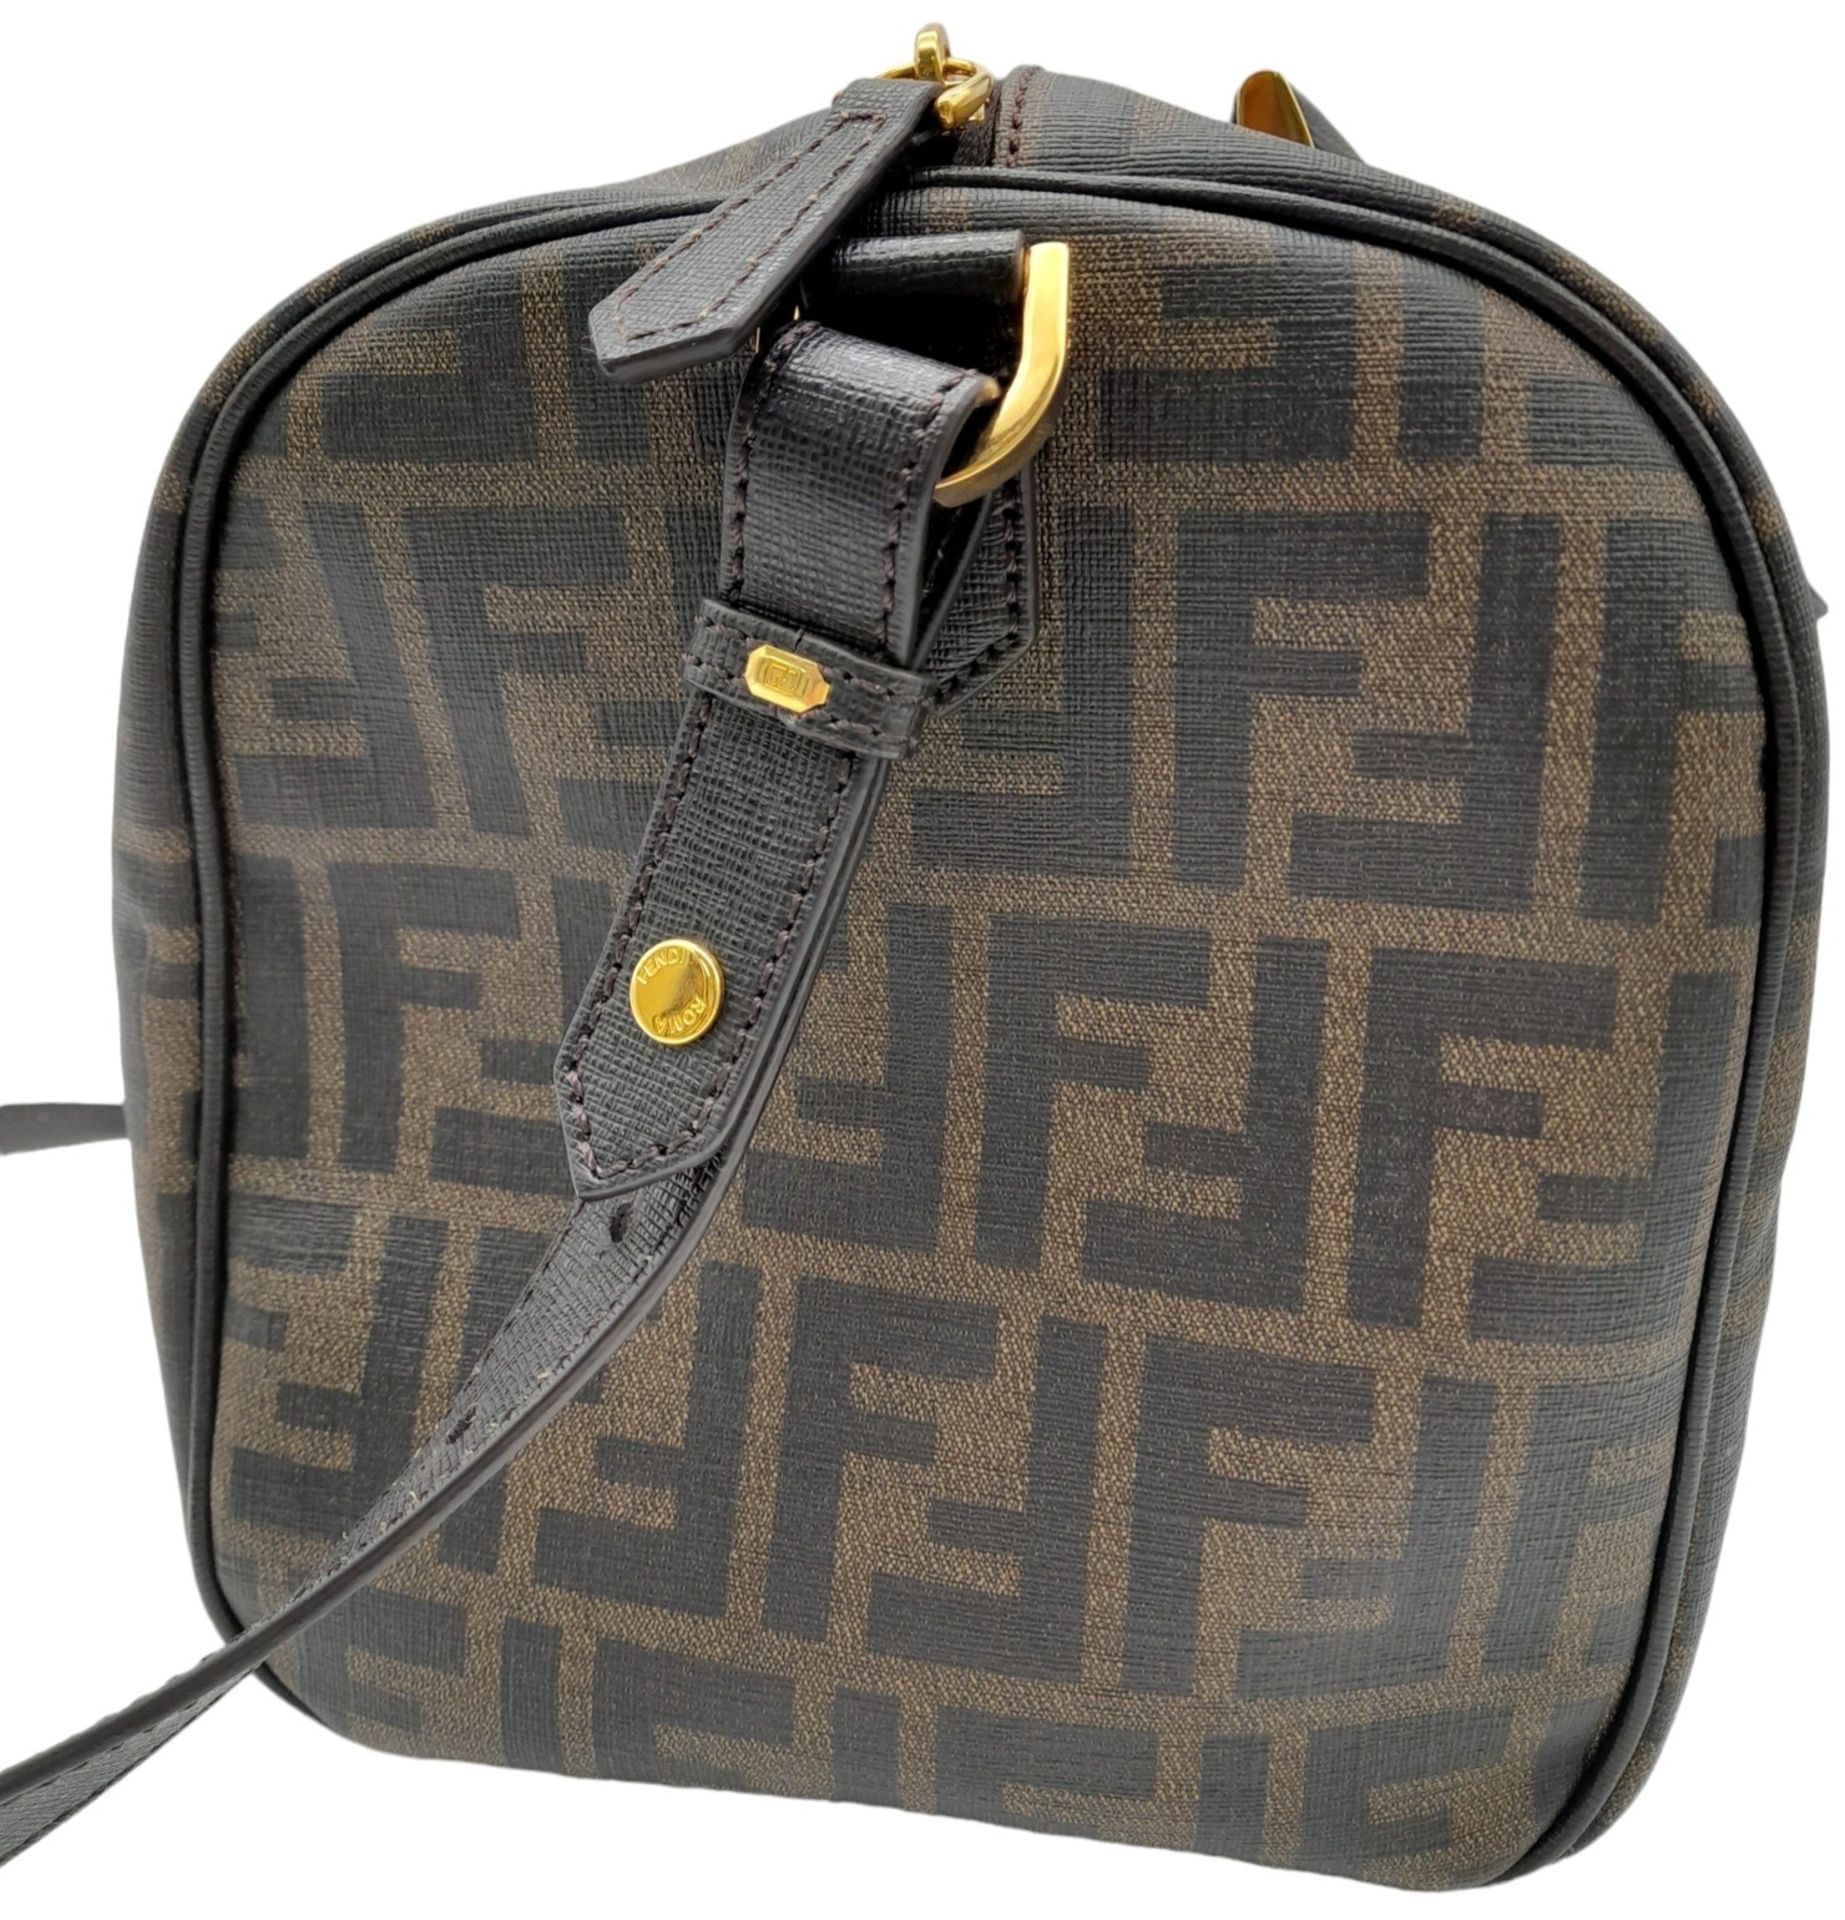 A Fendi Zucca Canvas Boston Bag. Canvas exterior, gold-tone hardware, adjustable strap, zipped top - Image 3 of 9